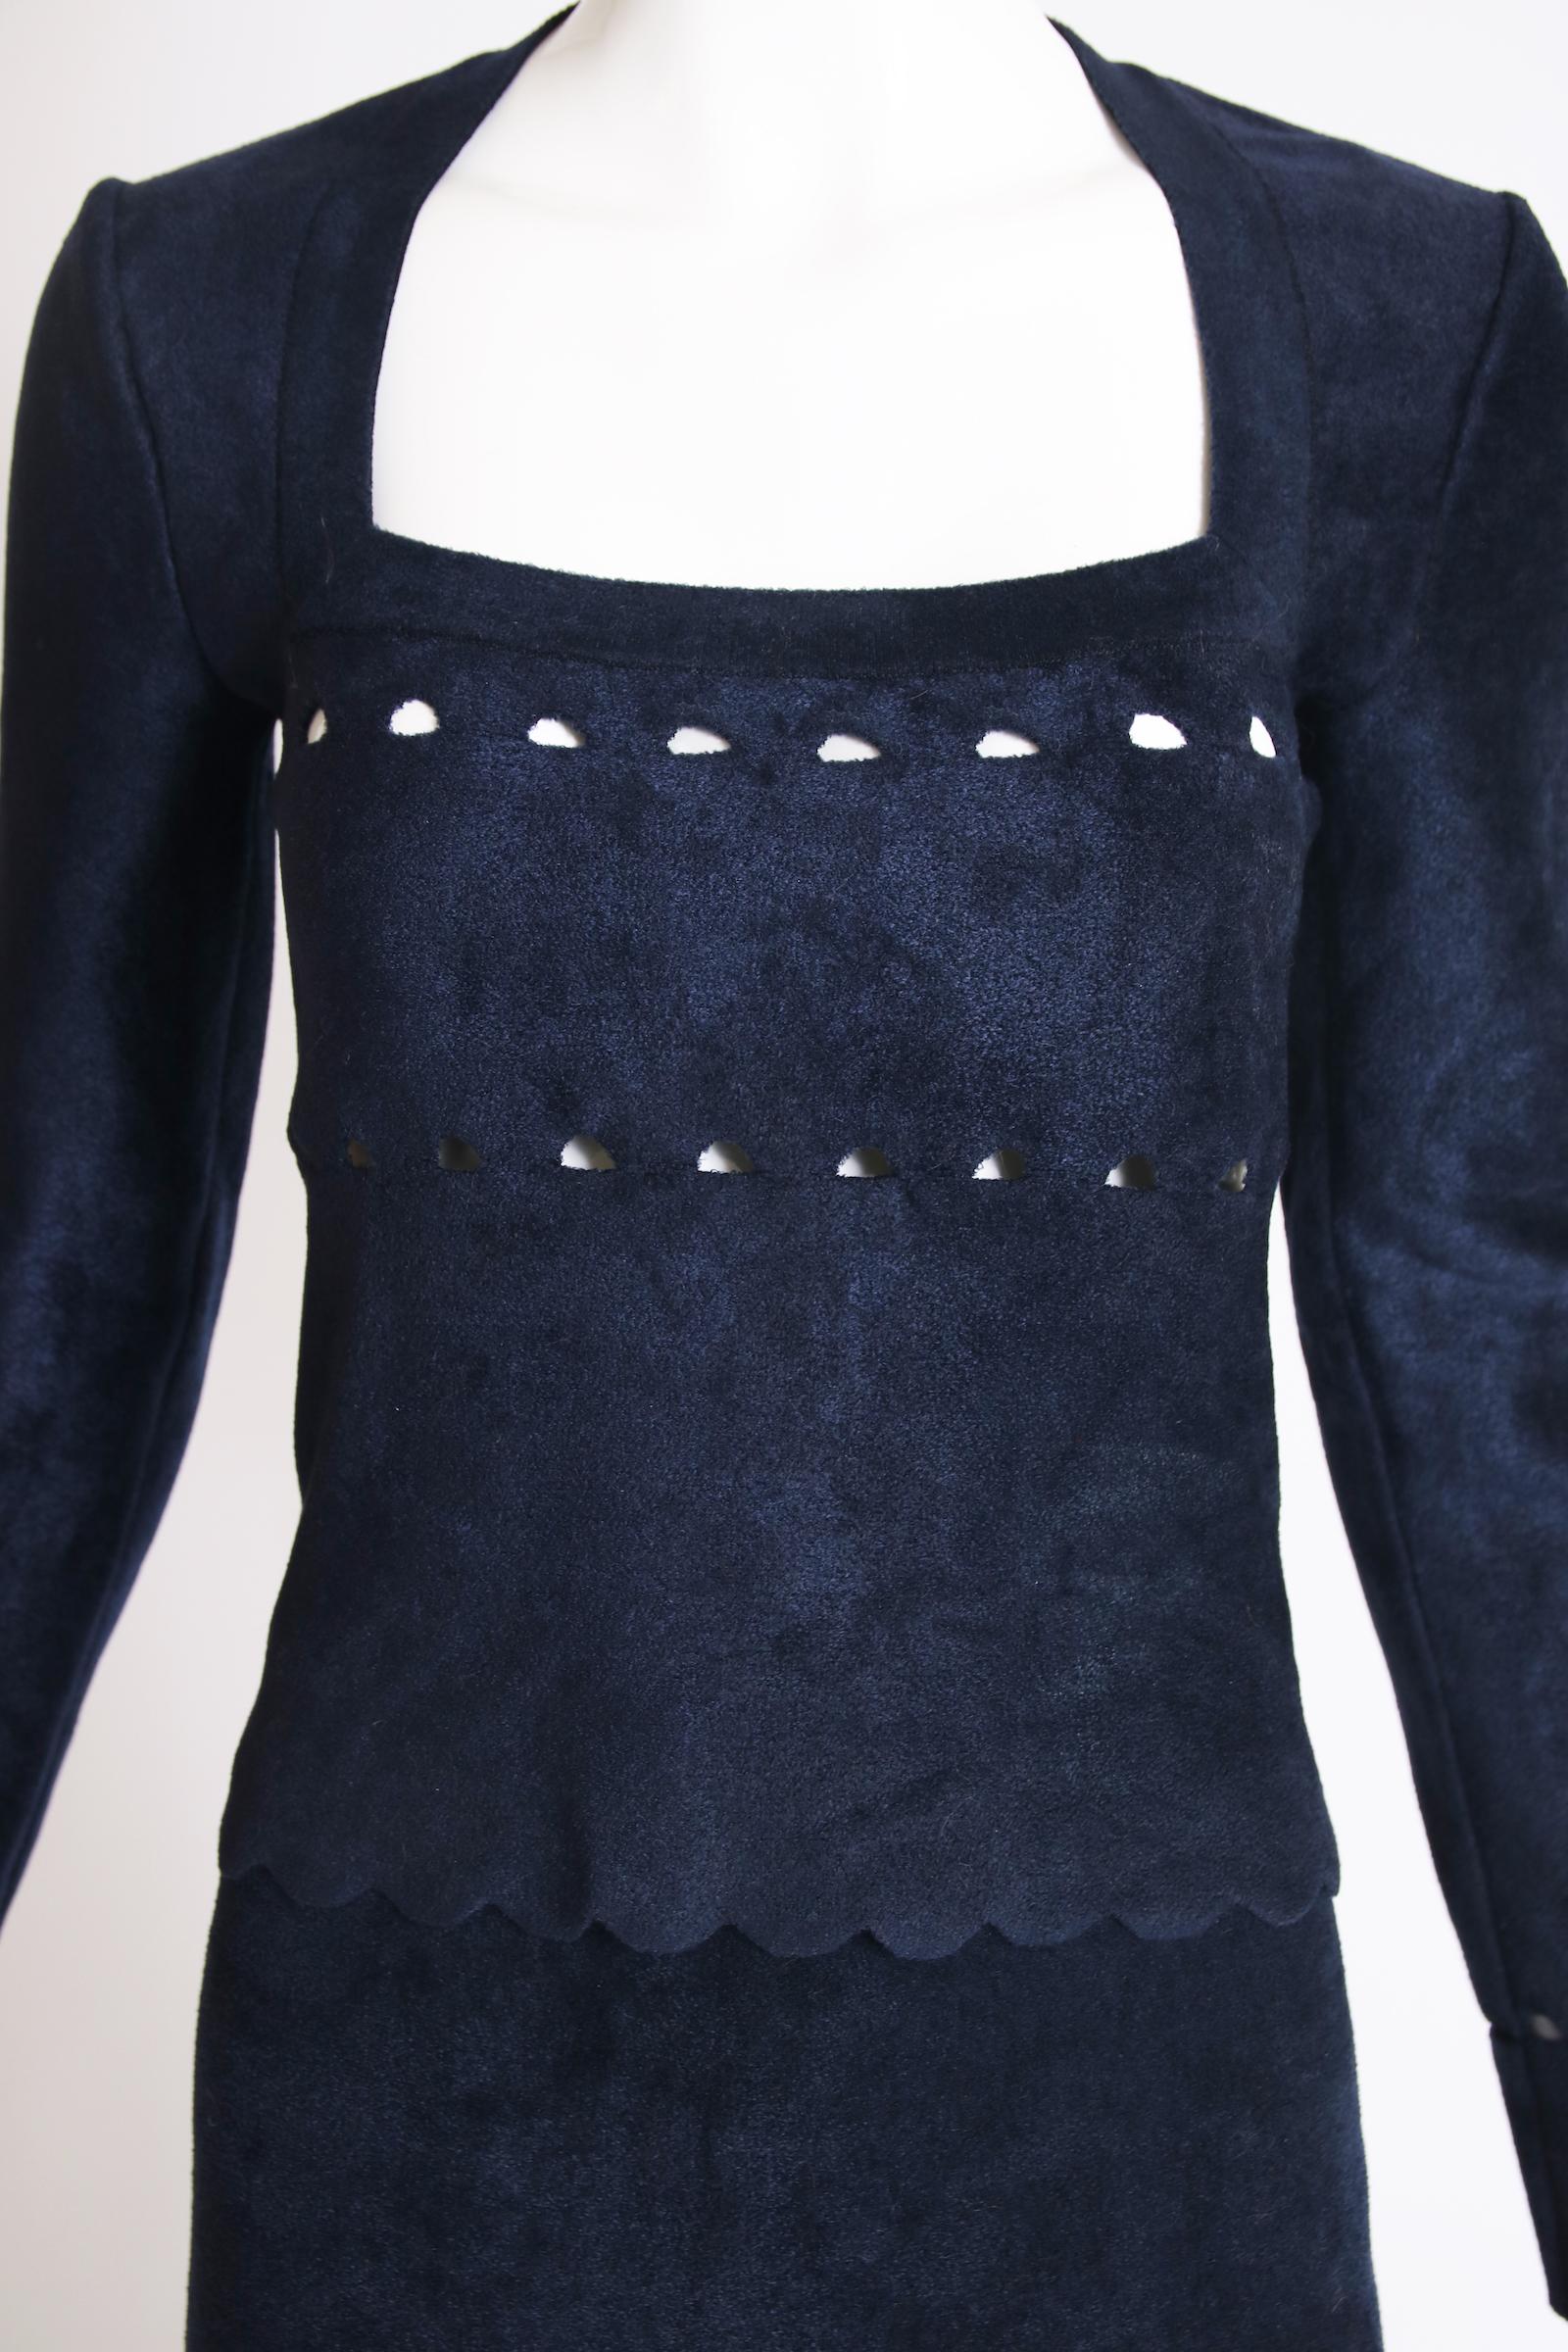 Alaia Midnight Blue Top & Skirt Ensemble w/Cutouts In Excellent Condition For Sale In Studio City, CA